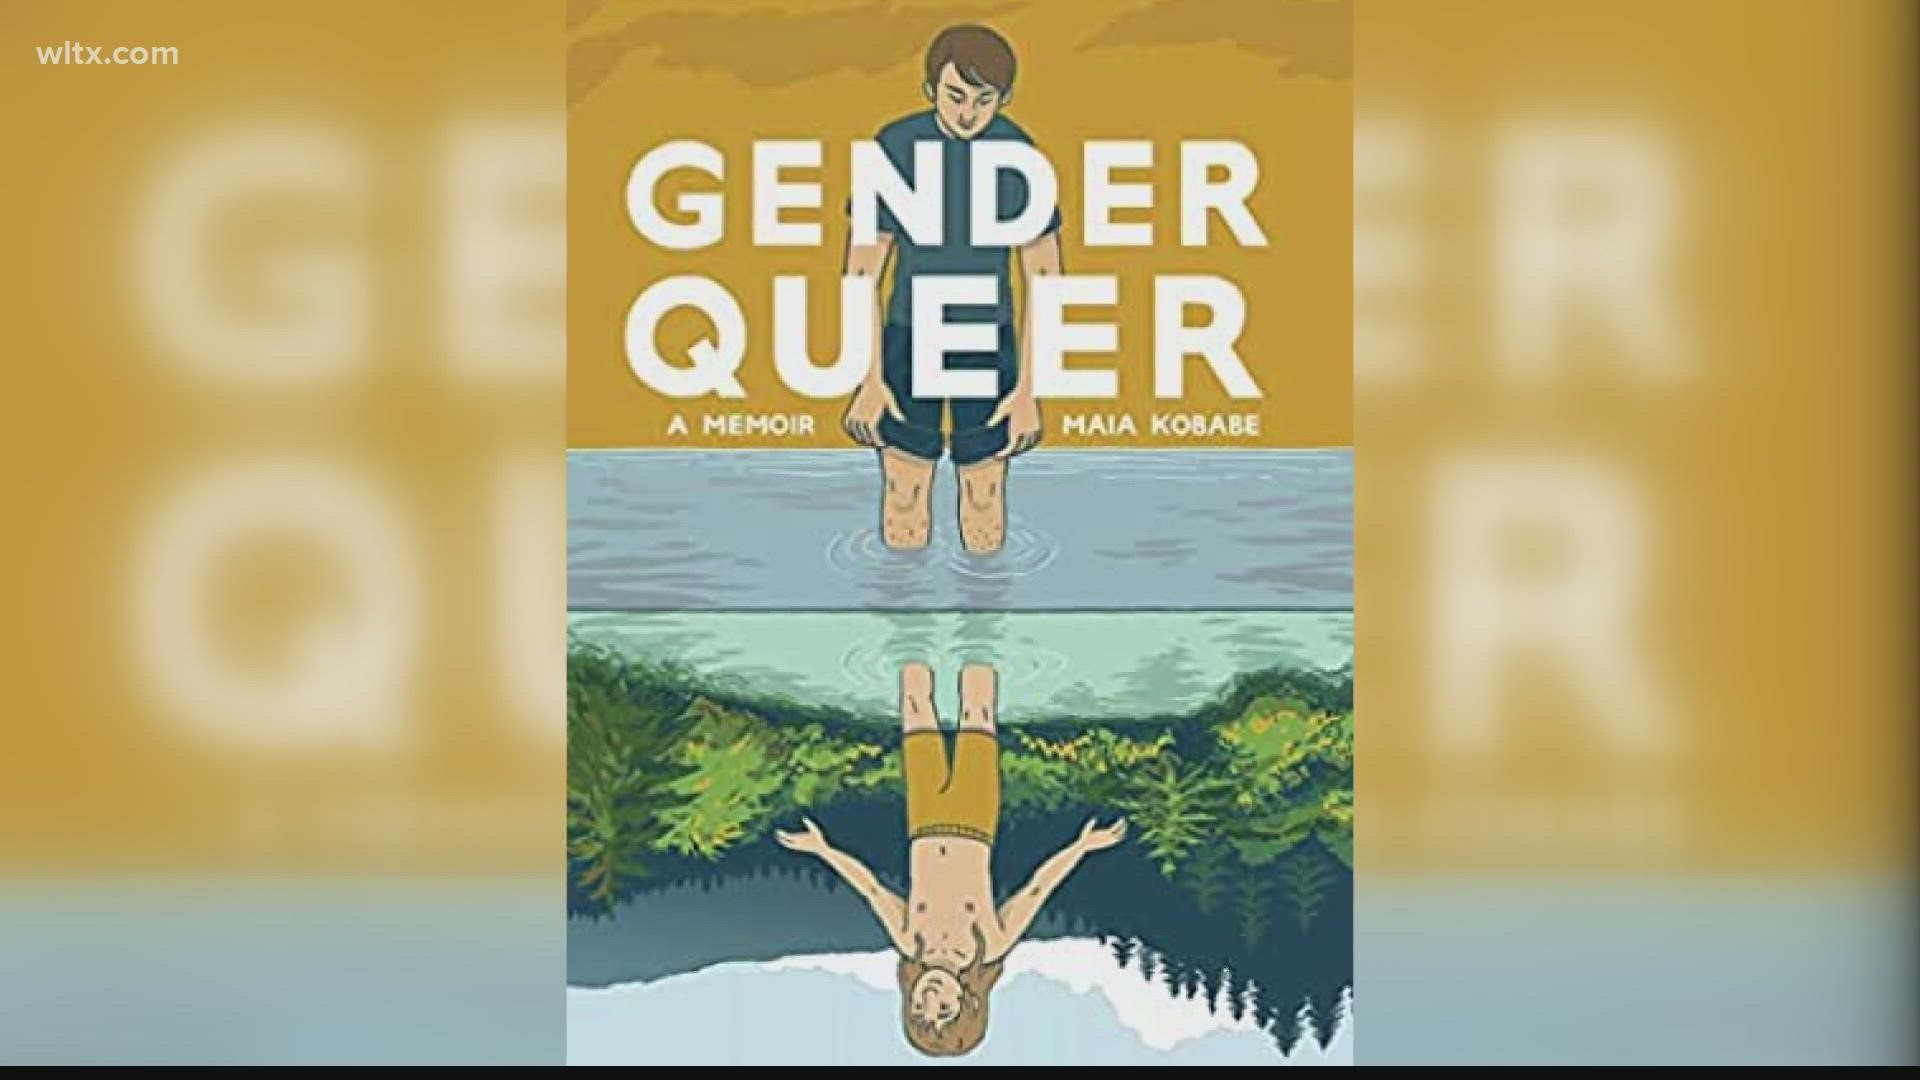 Governor Henry McMaster wants to know how "Gender Queer: A Memoir," by Maia Kobabe, which has explicit drawings of sexual acts, was found in a SC school district.